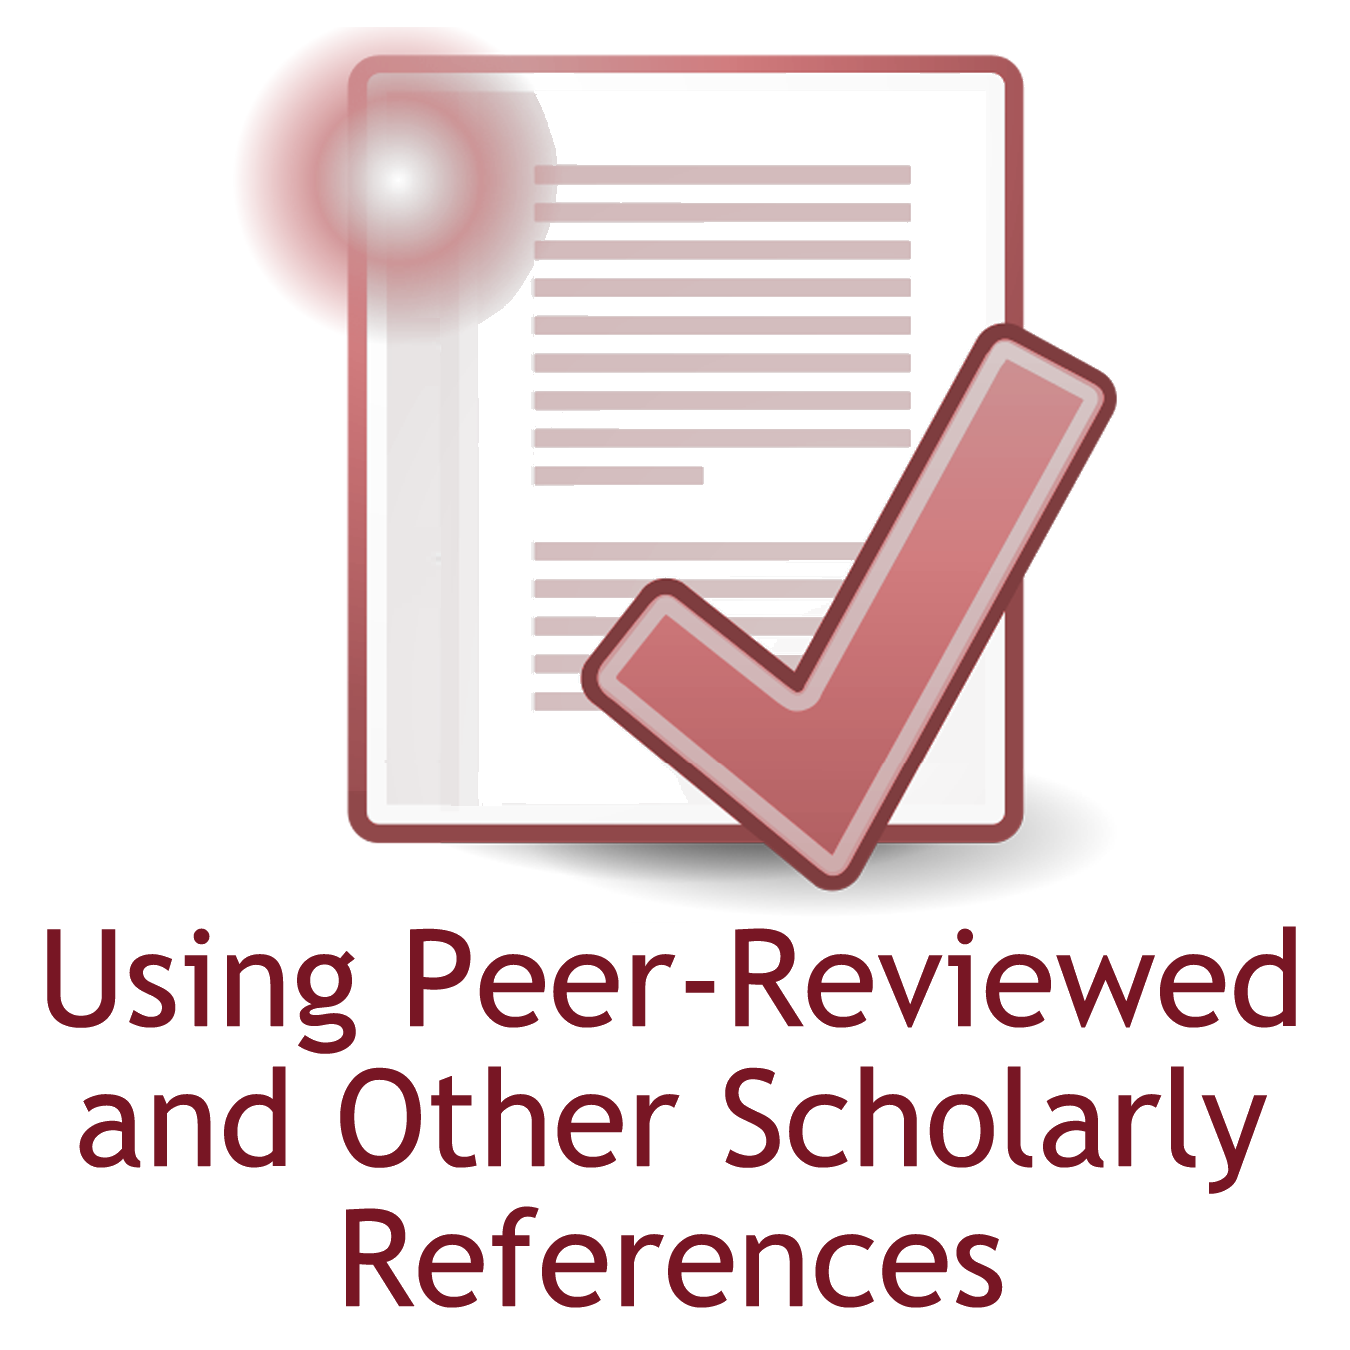 purpose of referencing in academic writing